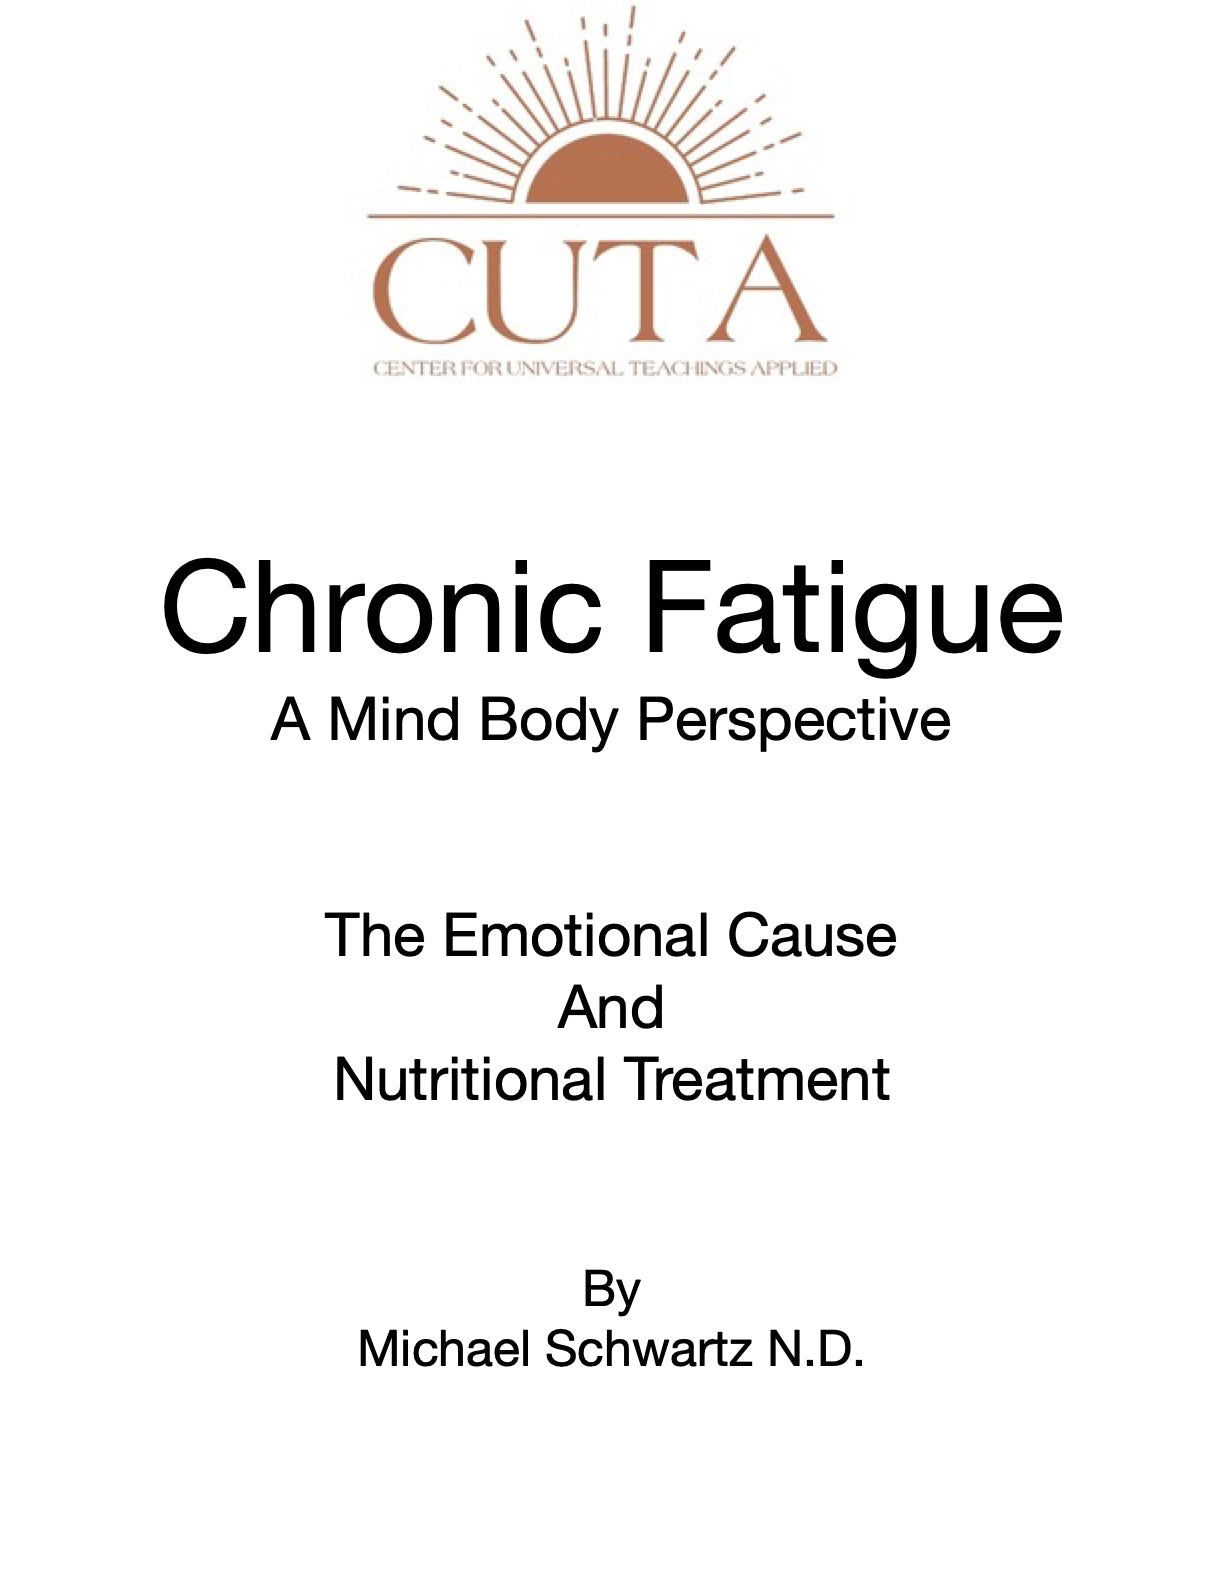 Chronic Fatigue Booklet